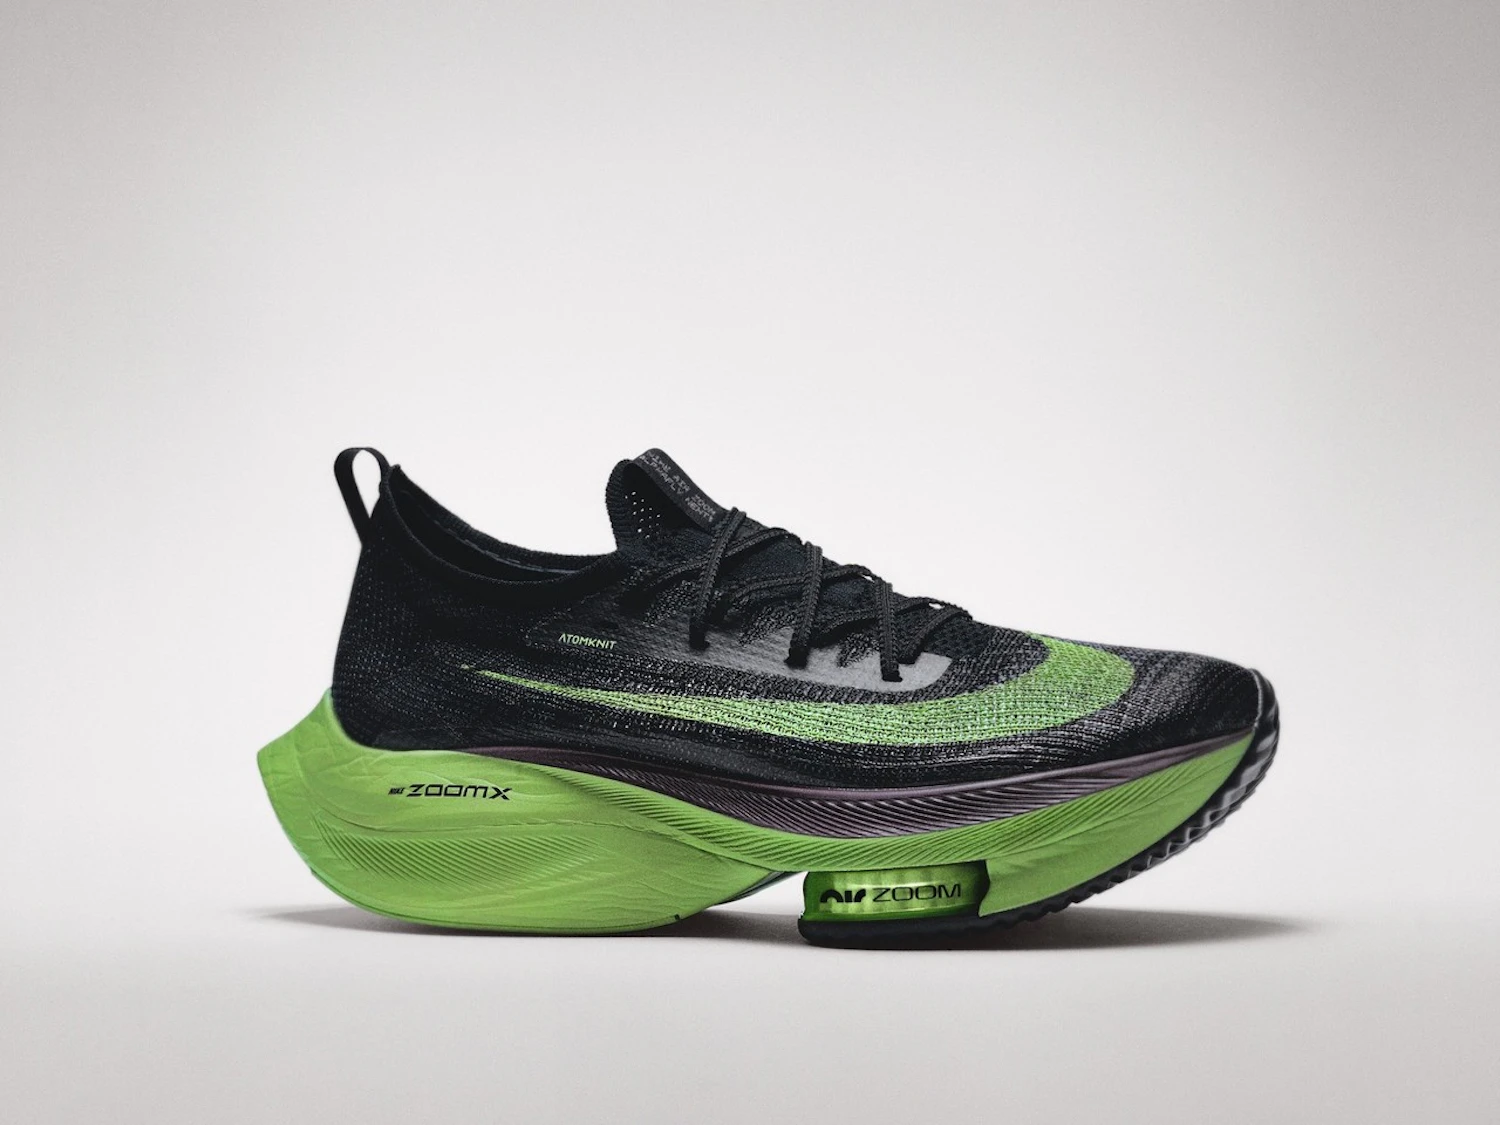 NIKE AIRZOOM ALPHAFLY NEXT％　/　Image Credit : NIKE